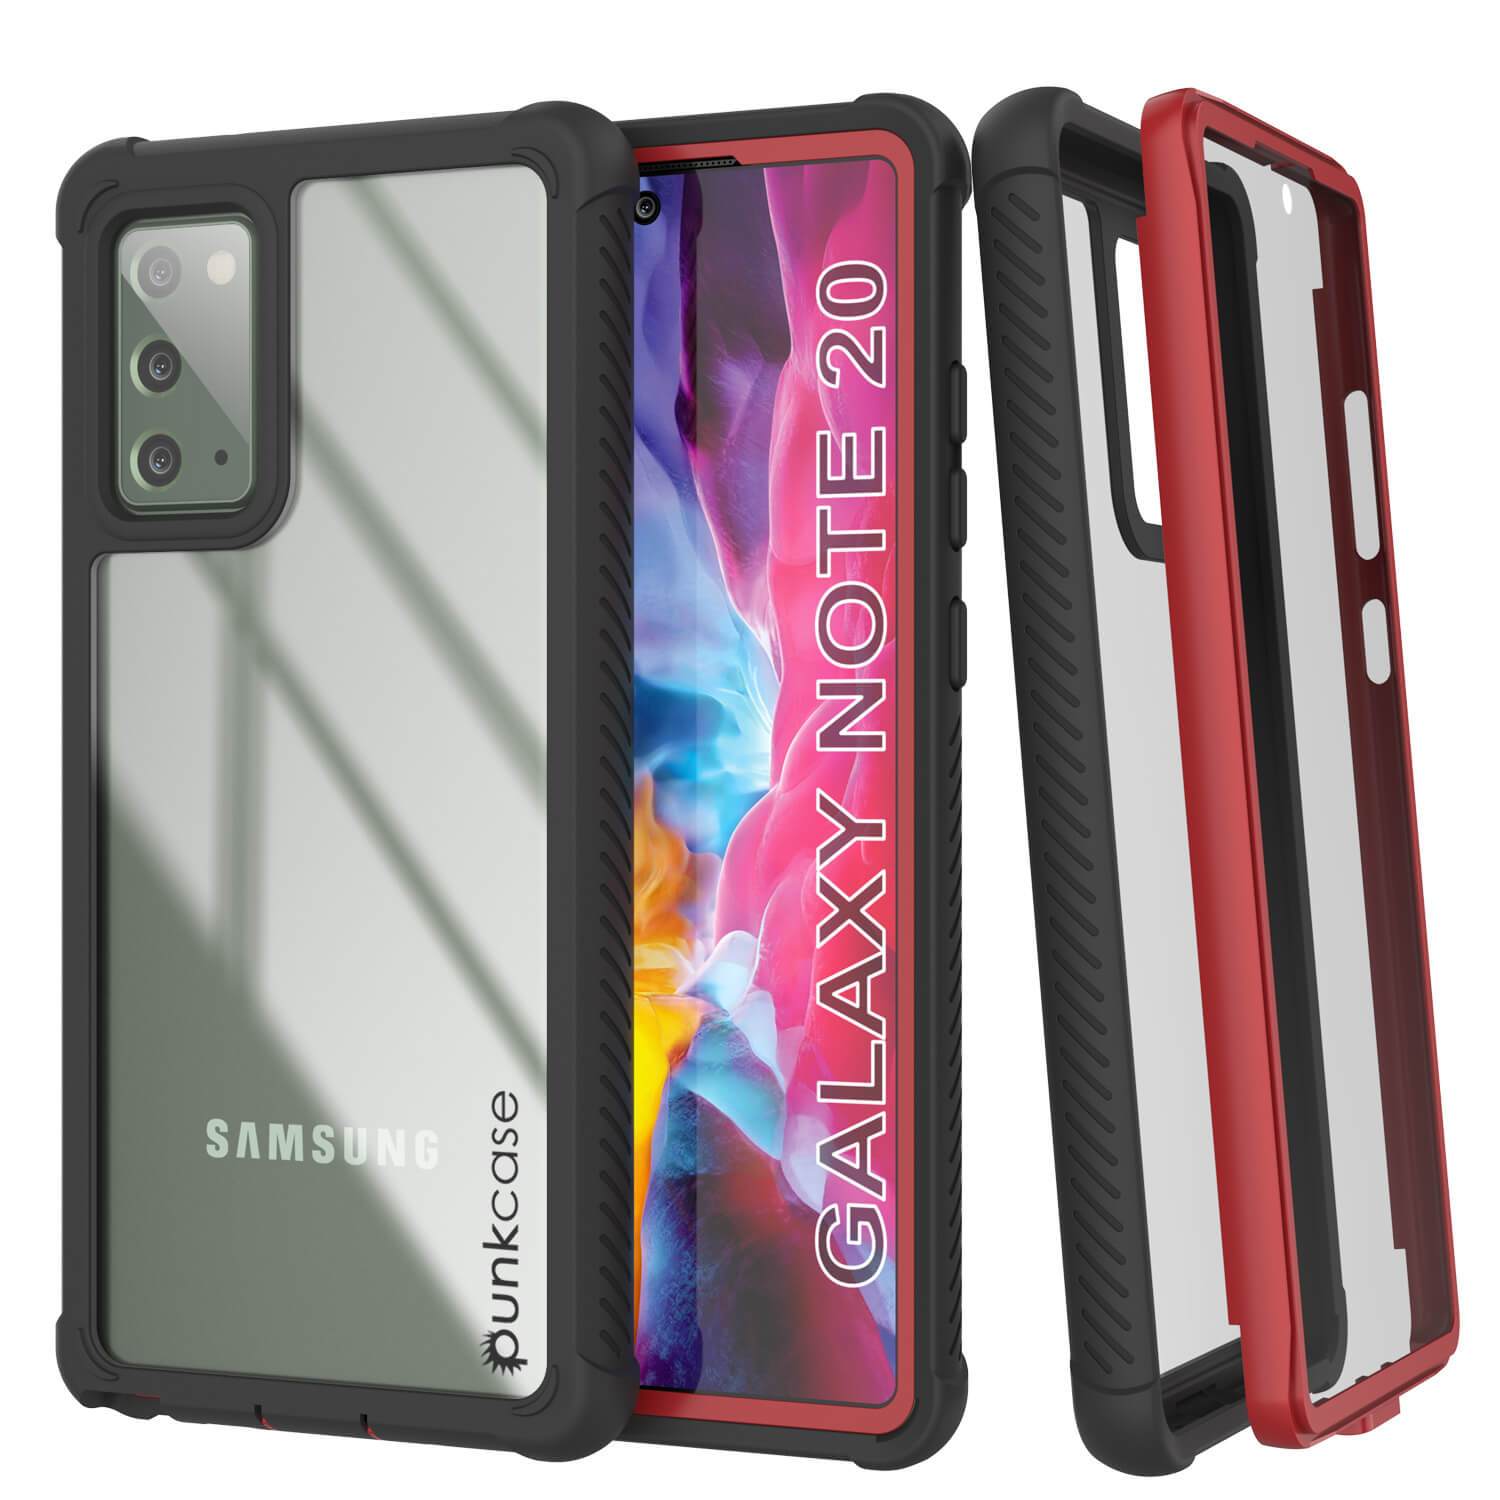 Punkcase Galaxy Note 20 Case, [Spartan Series] Red Rugged Heavy Duty Cover W/Built in Screen Protector